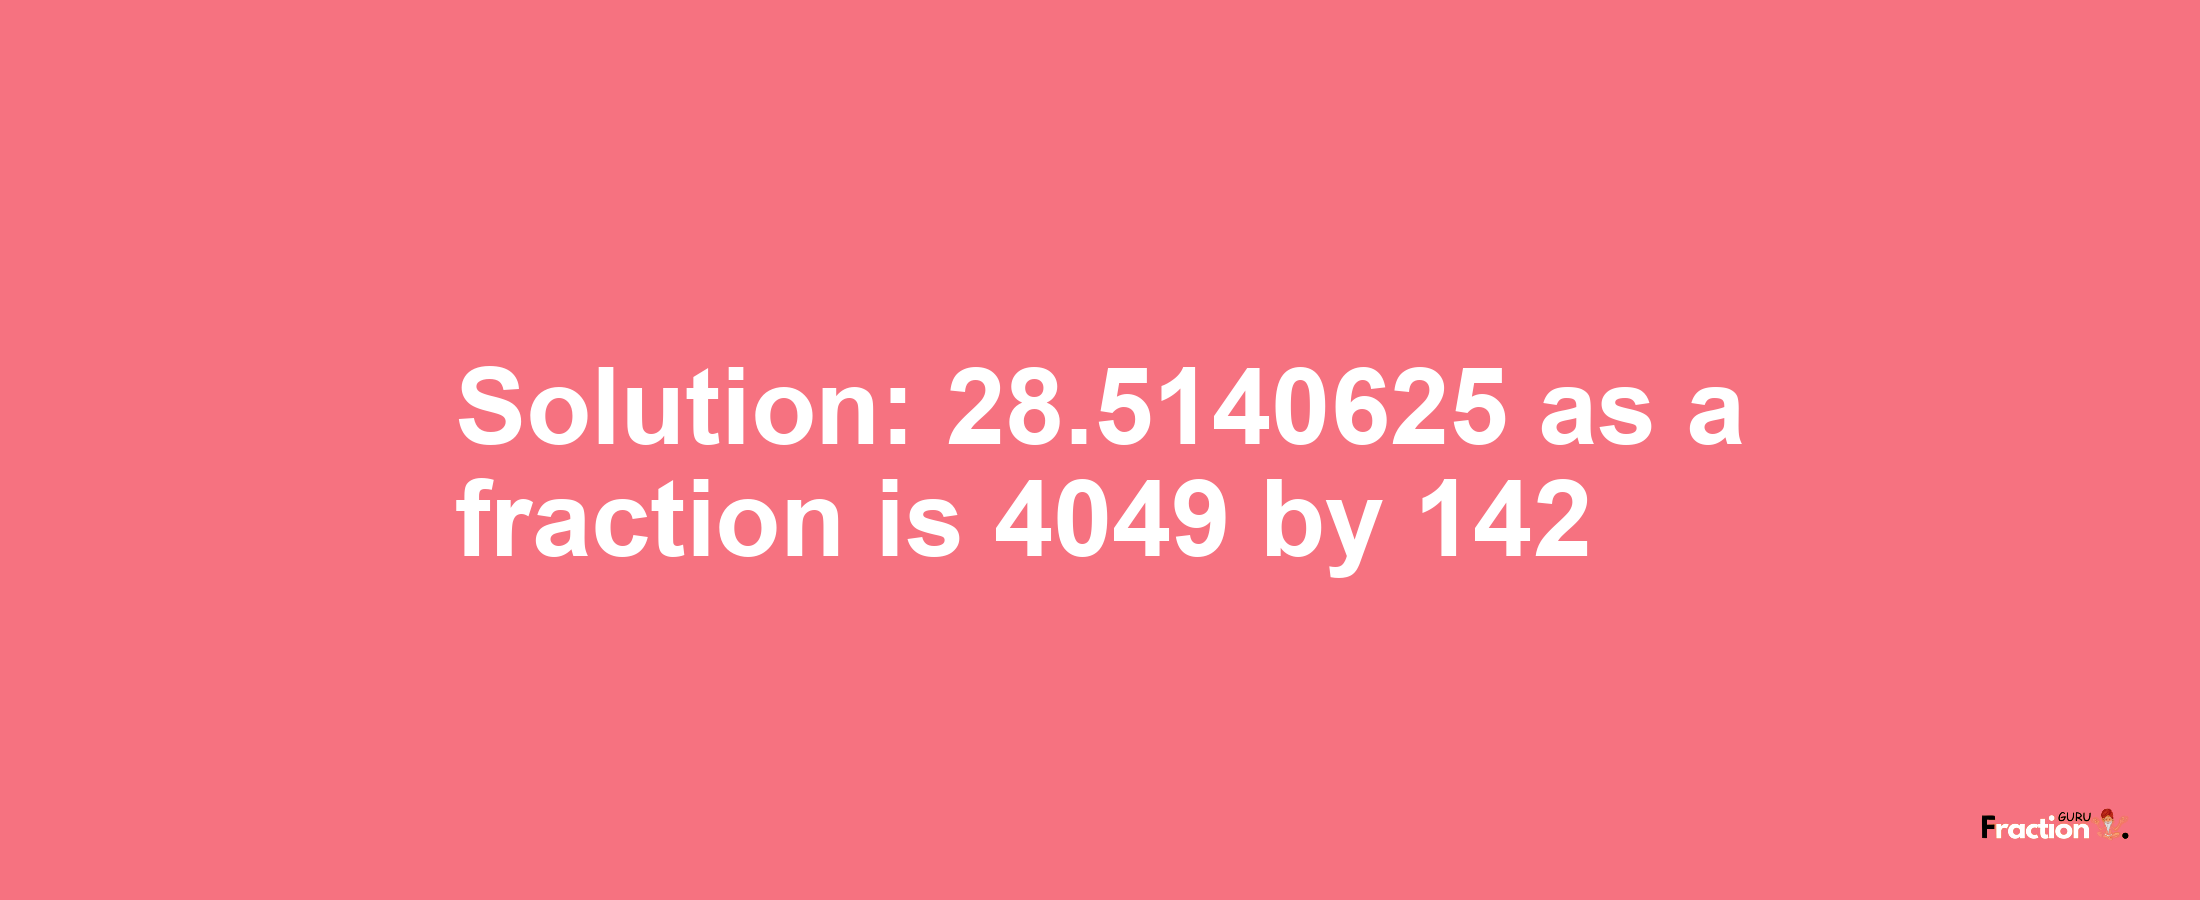 Solution:28.5140625 as a fraction is 4049/142